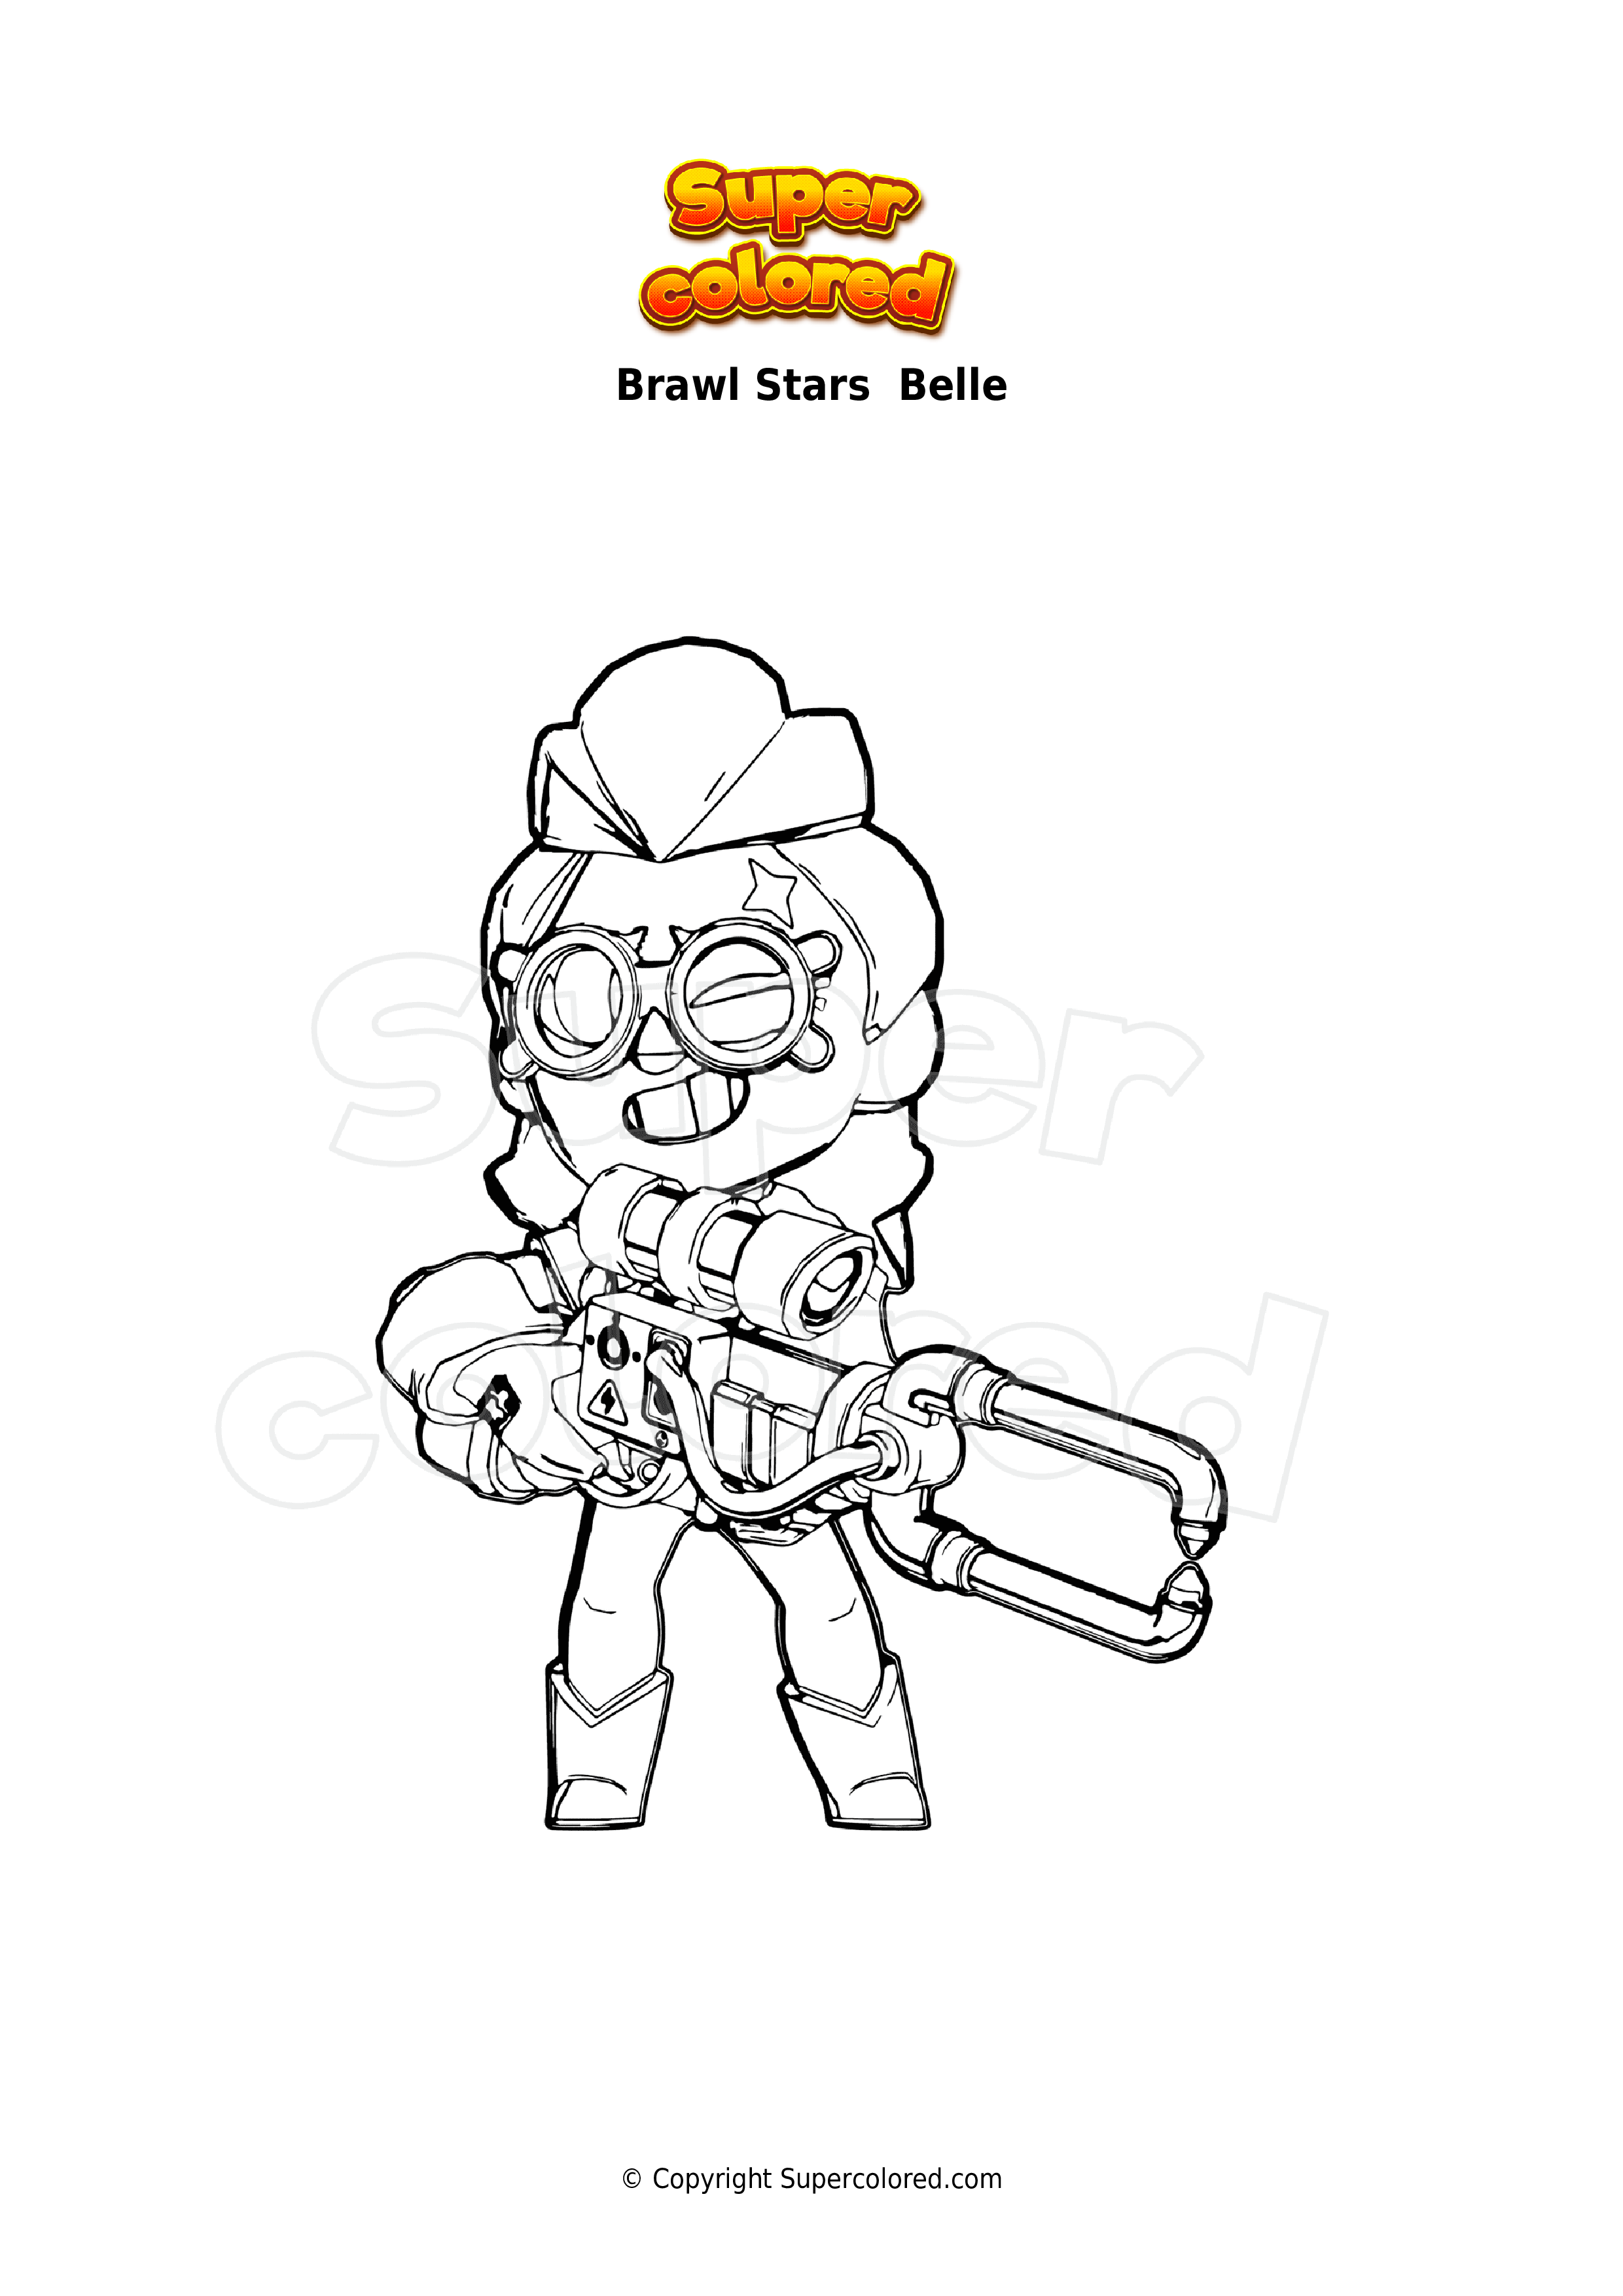 Coloring Page Brawl Stars Belle Supercolored Com - brawl stars belle coloring pages